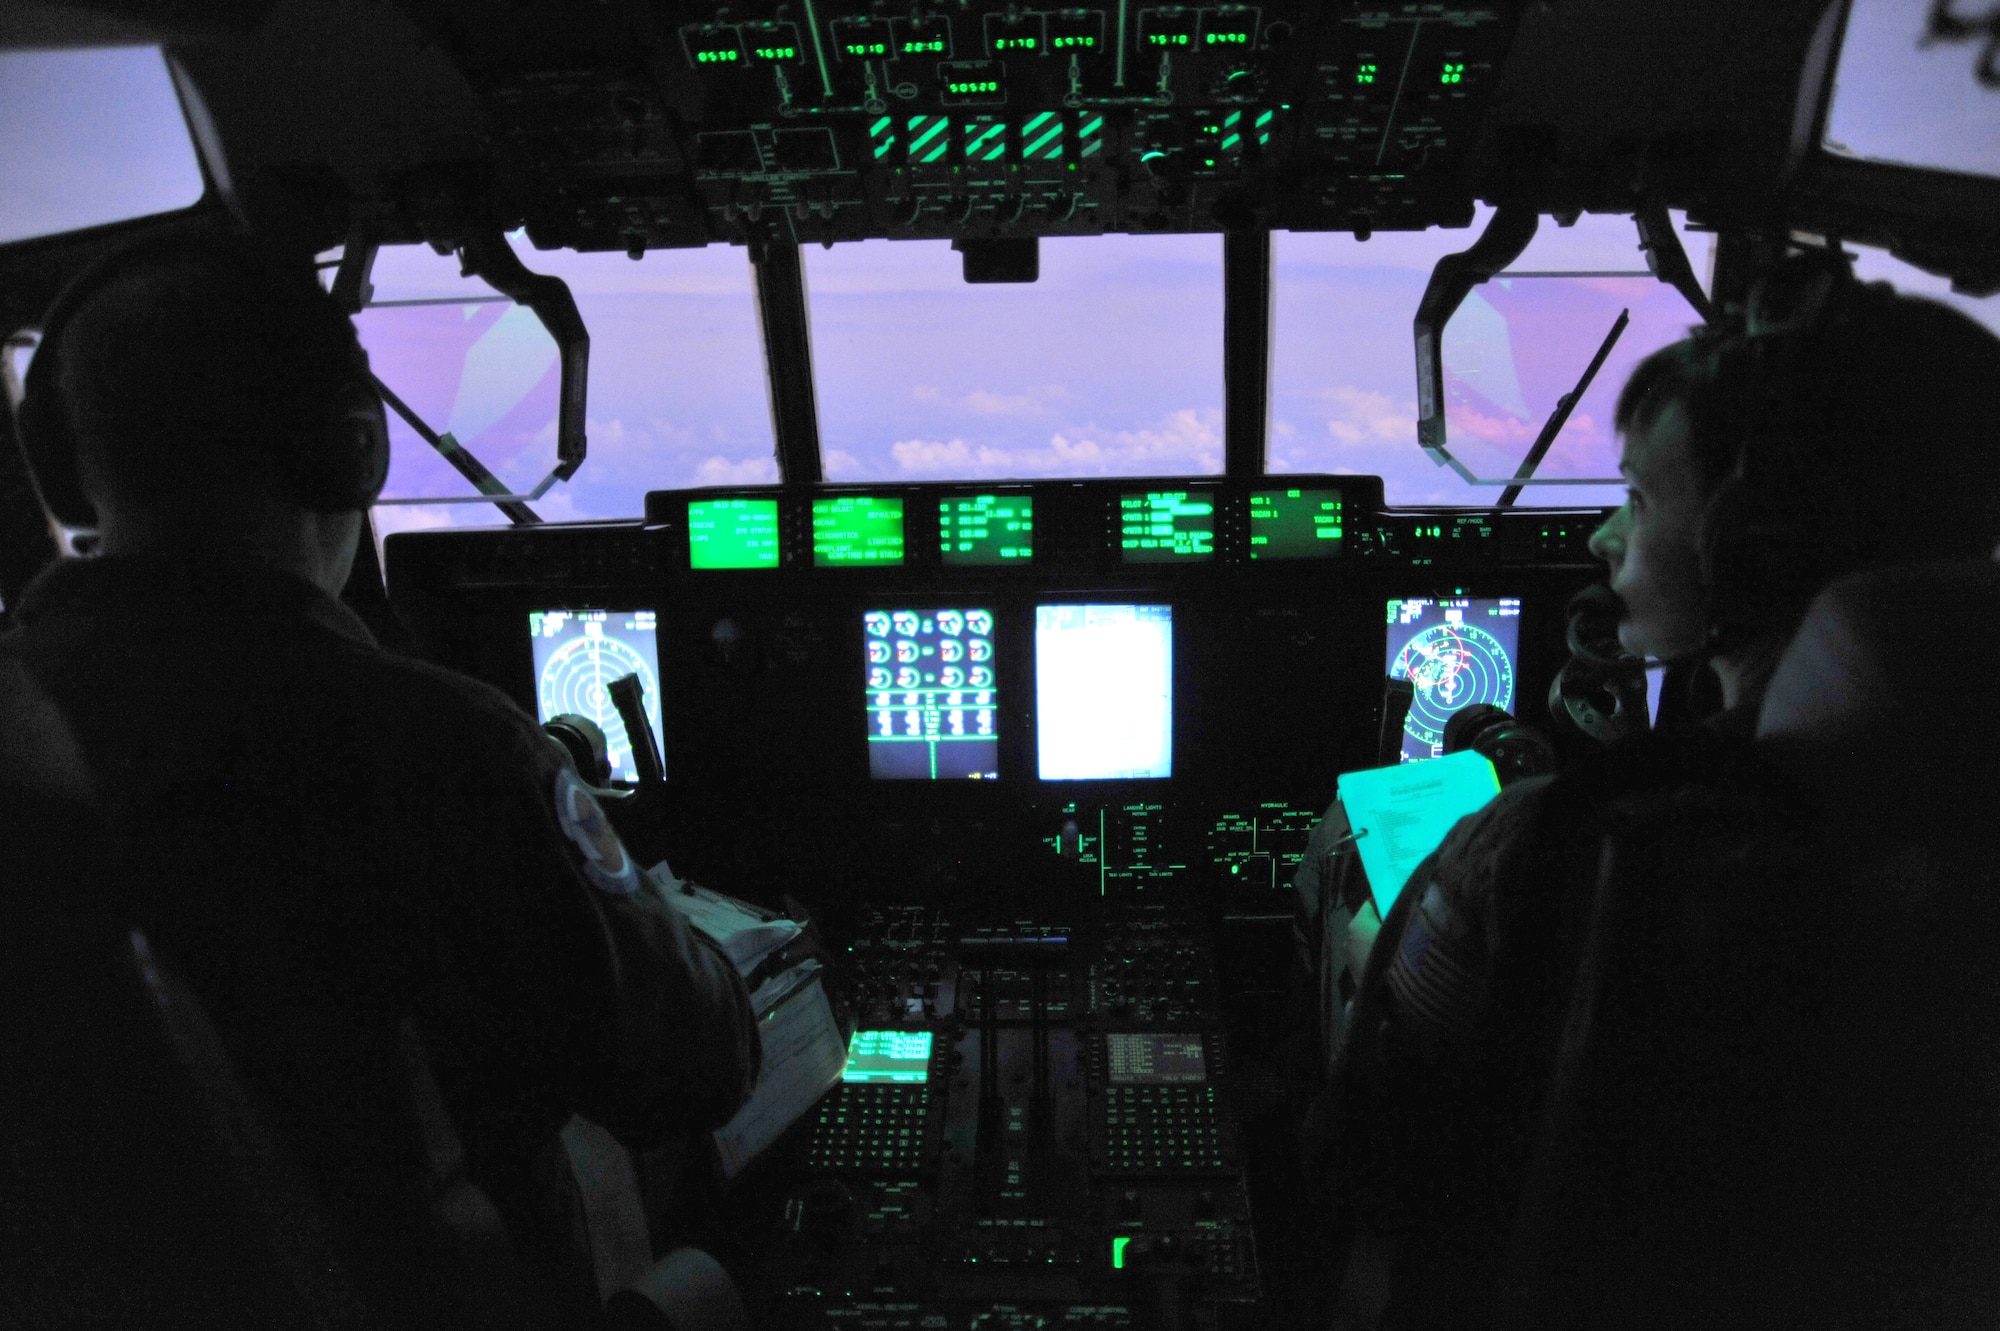 Lt. Col. Jim Hitterman, 53rd Weather Reconnaissance Squadron aircraft commander, and Maj. Devon Meister, co-pilot, fly into Tropical Storm Guillermo off the coast of Hawaii Aug. 3, 2015, to gather meteorological data for the Central Pacific Hurricane Center. (U.S. Air Force photo/Maj. Marnee A.C. Losurdo)
